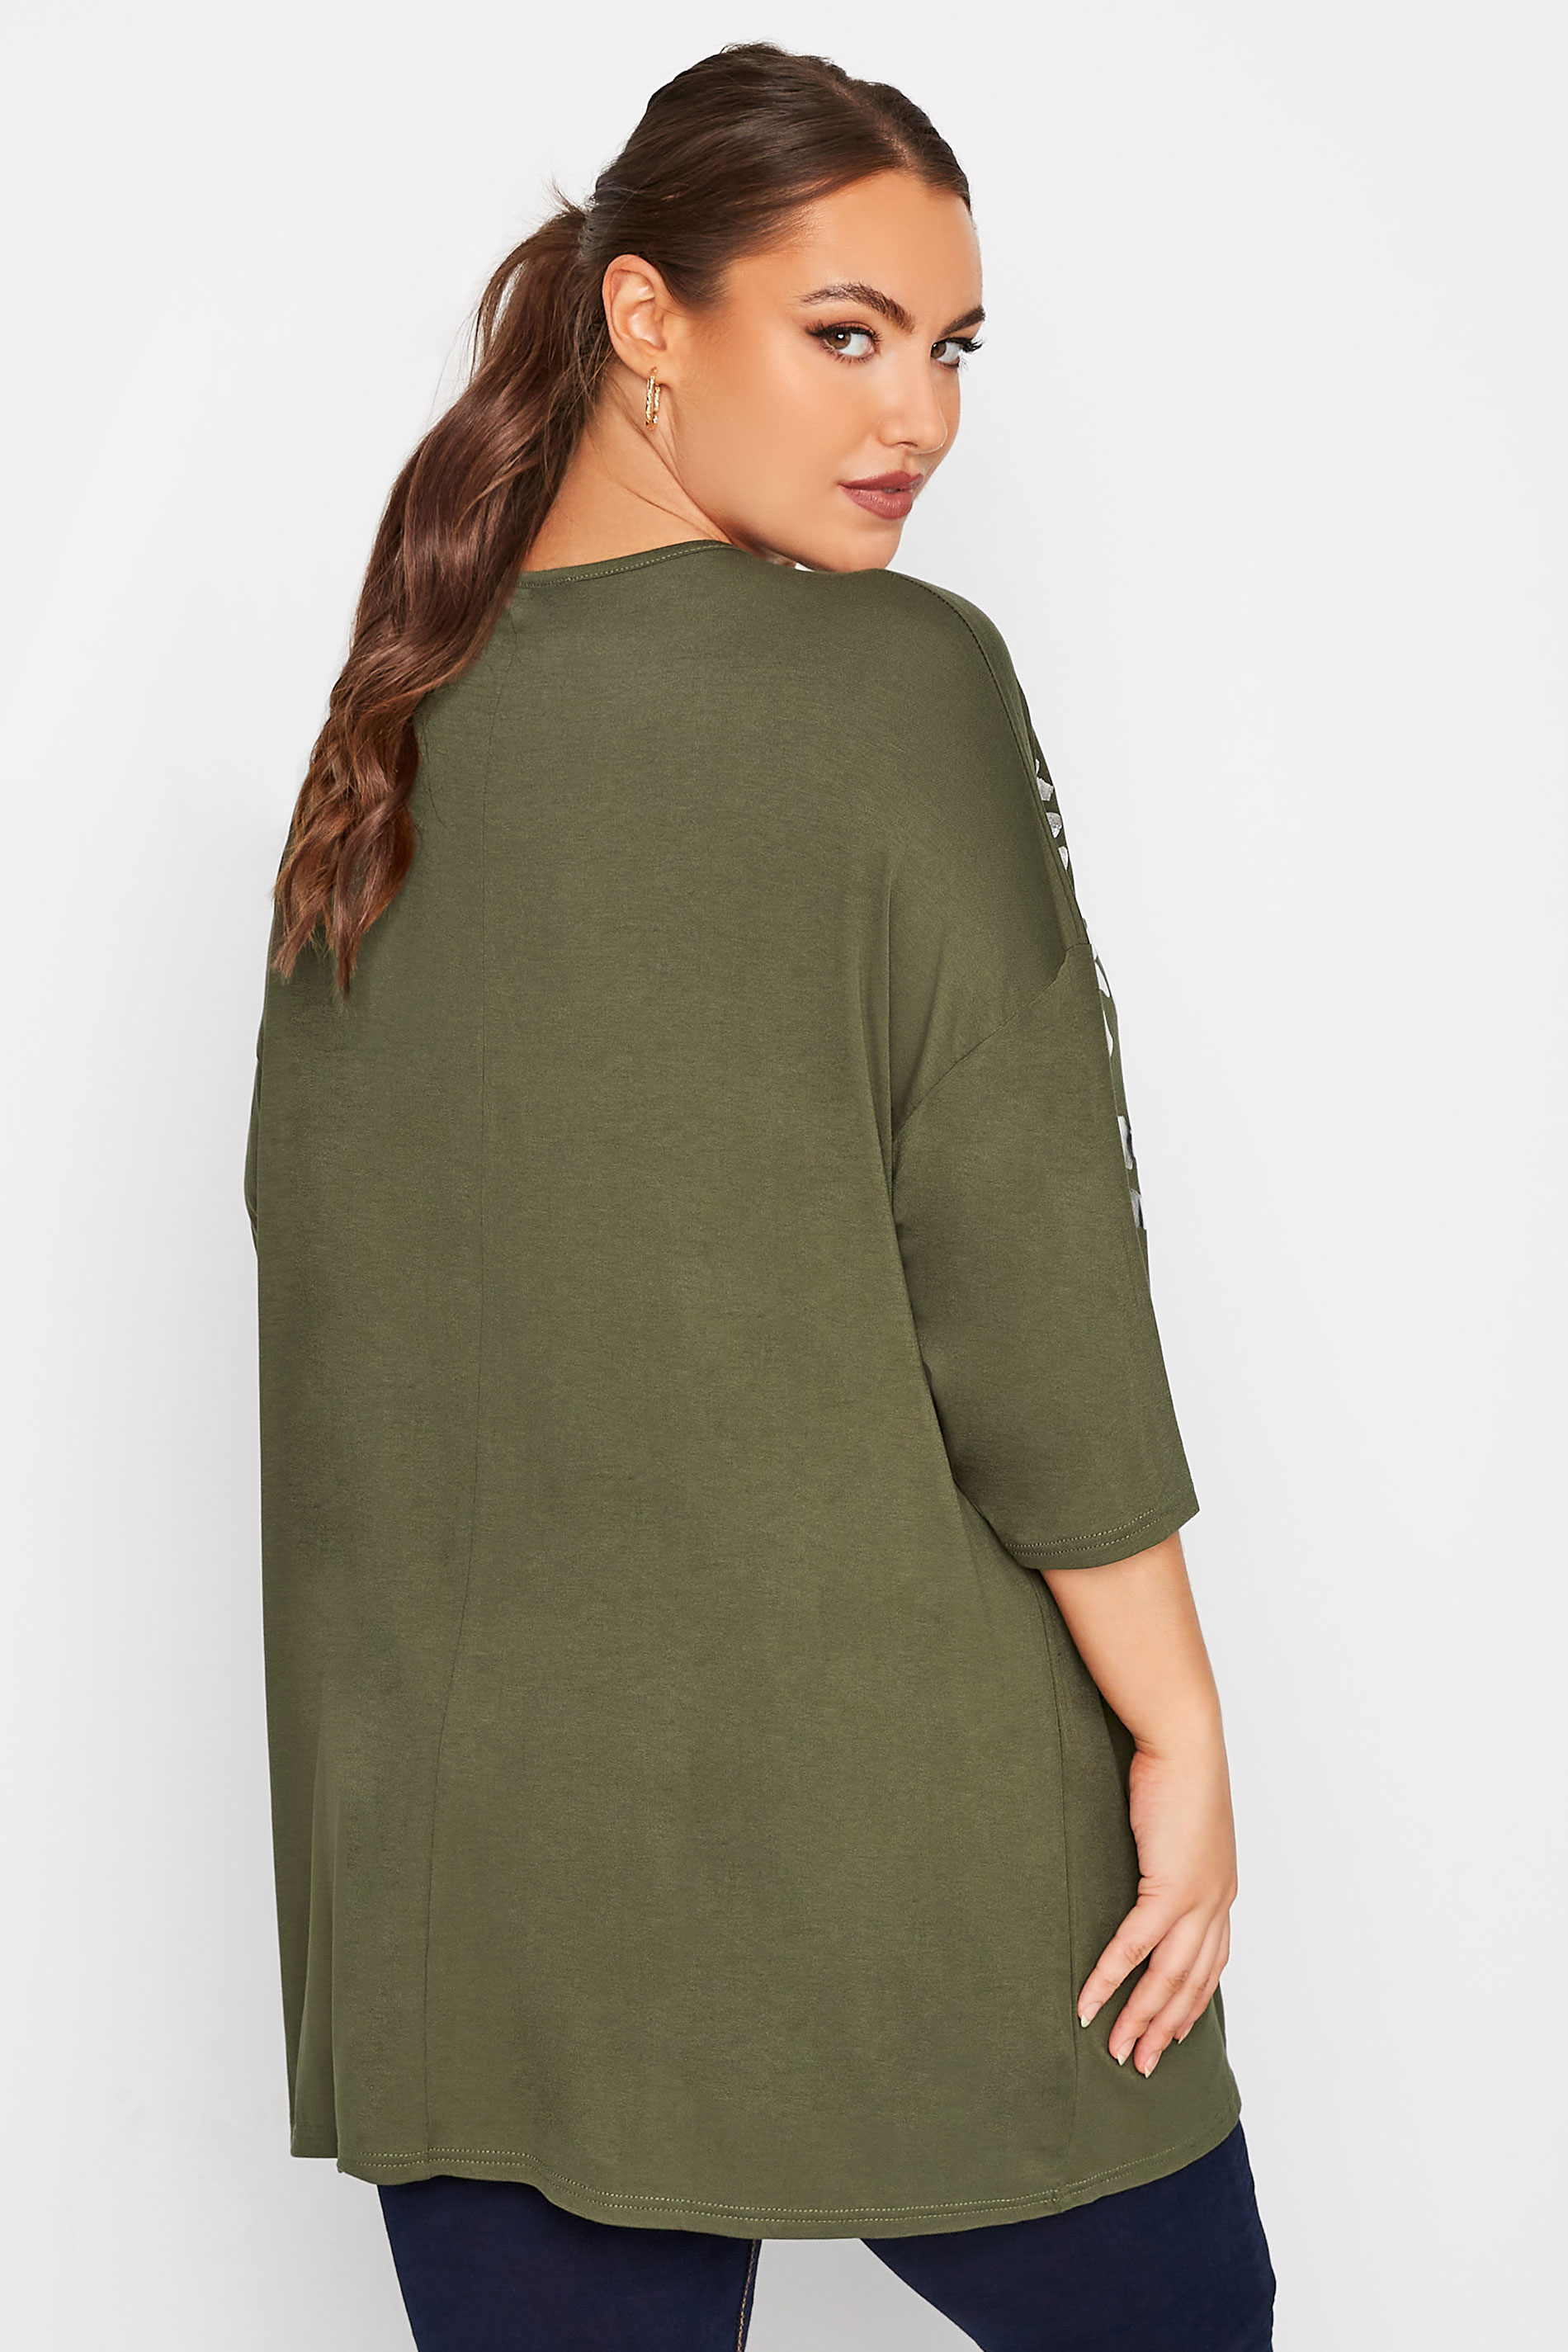 Plus Size LIMITED COLLECTION Khaki Green Foil Leopard Print Oversized T-Shirt | Yours Clothing  3